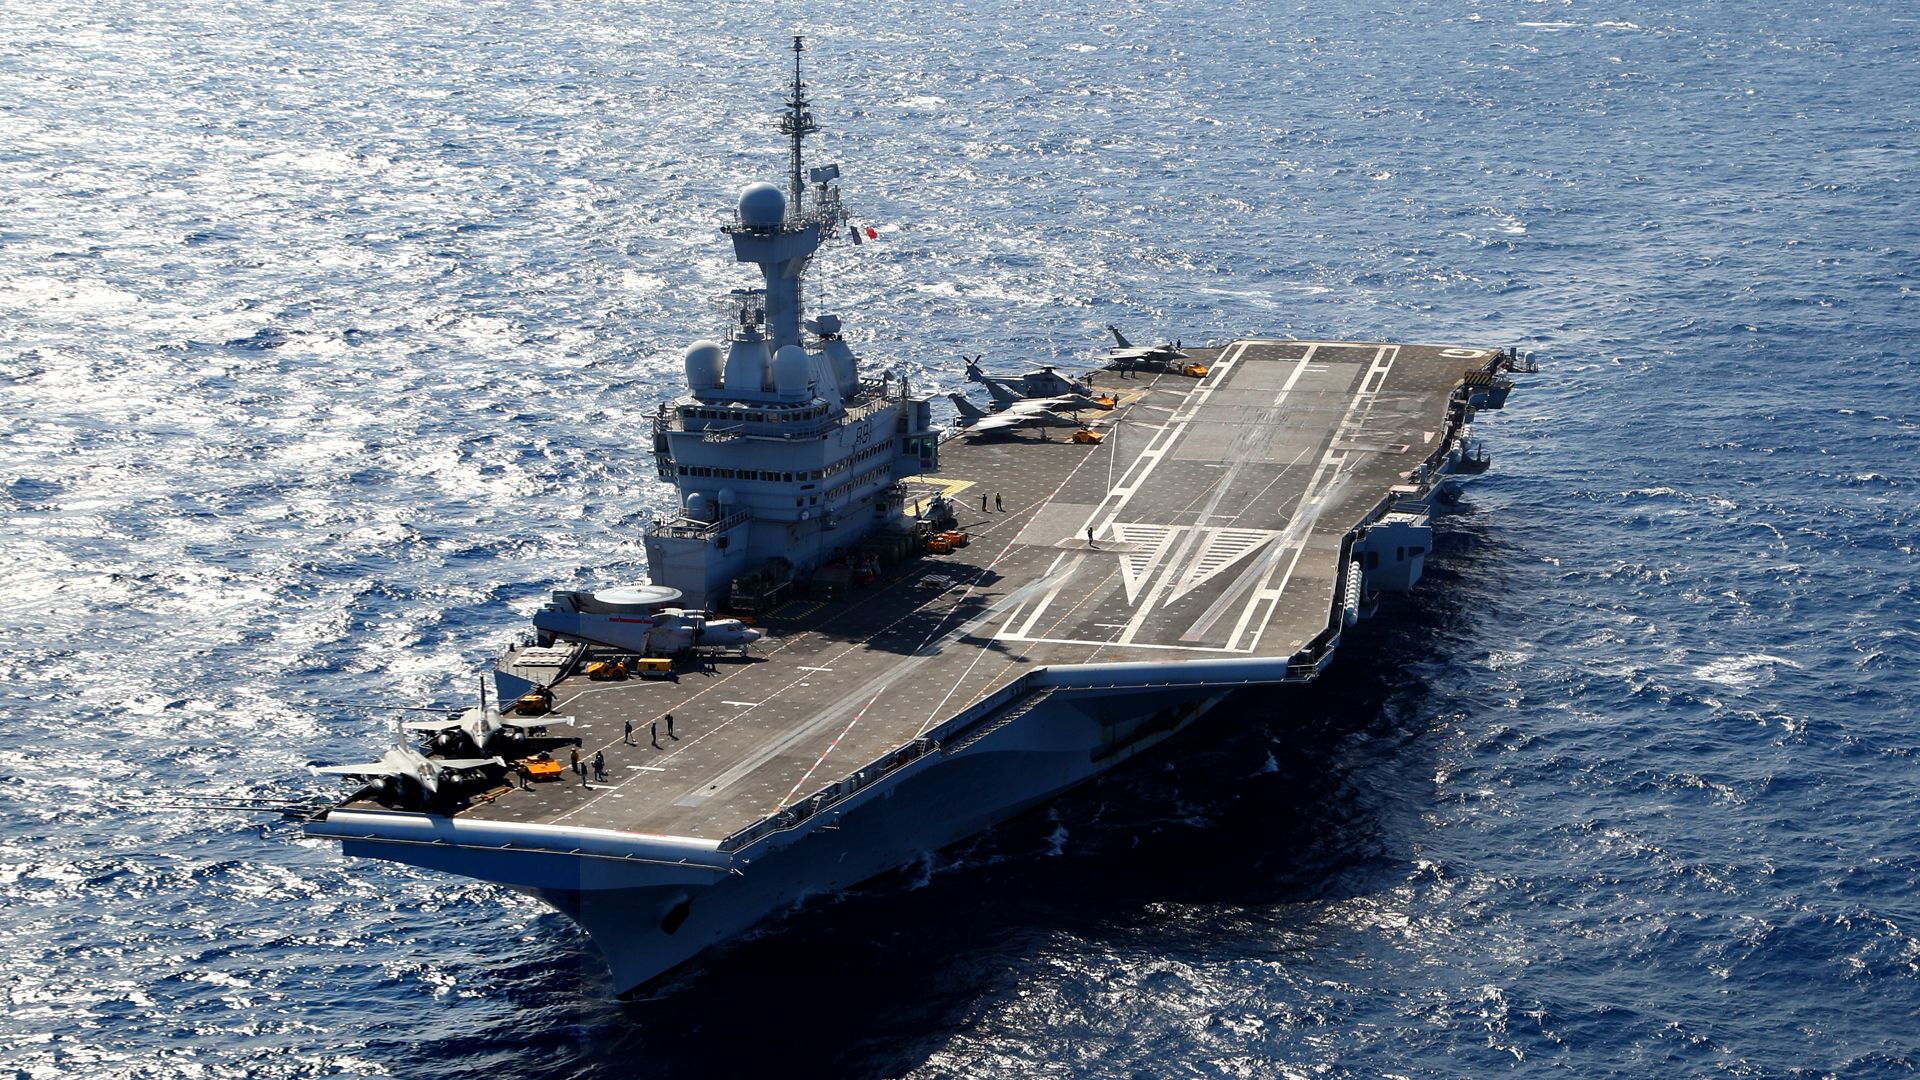 SNEF (PACA - CIEL)/Naval Group (for the Ministry of the Armed Forces - the French Navy)